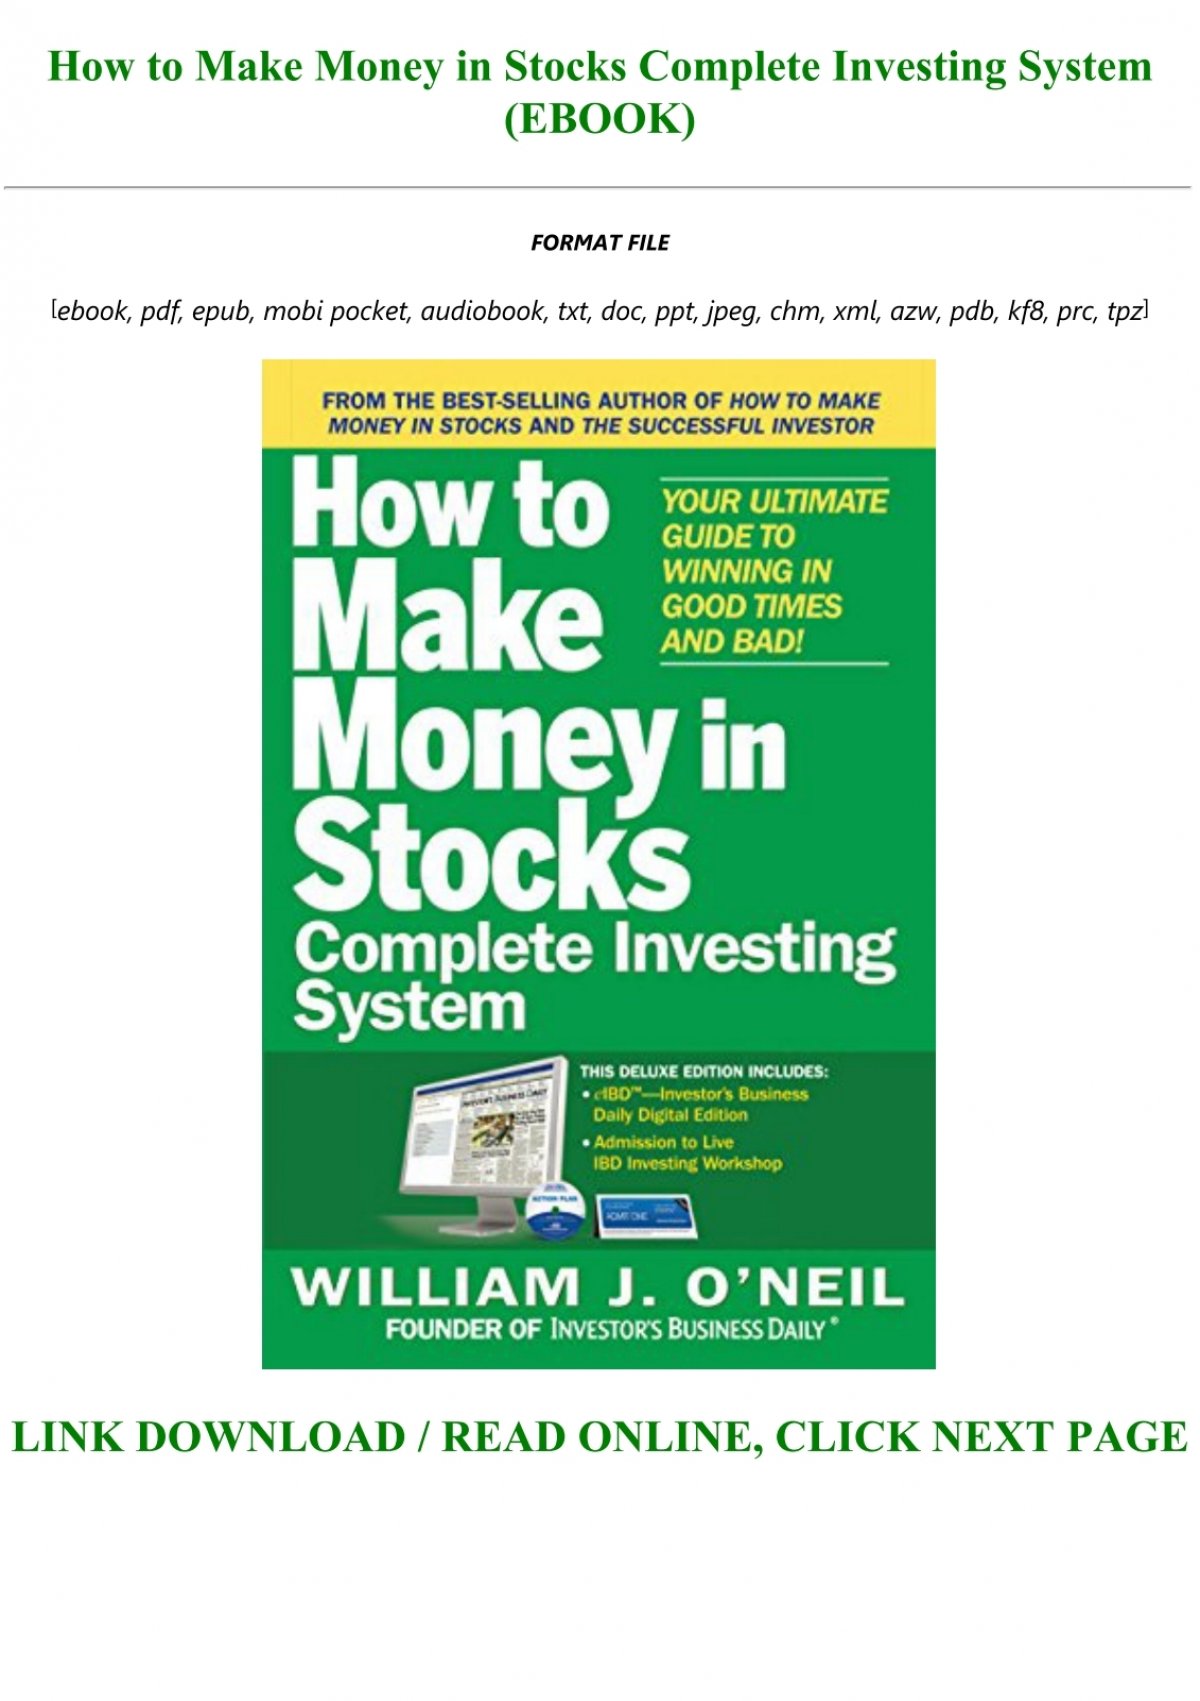 investing in clinical trial stocks - Money|Stocks|Stock|System|Book|Market|Trading|Books|Guide|Times|Day|Der|Download|Investors|Edition|Investor|Description|Pdf|Format|Epub|O'neil|Die|Strategies|Strategy|Mit|Investing|Dummies|Risk|Gains|Business|Man|Investment|Years|World|Wie|Action|Charts|William|Dad|Plan|Good Times|Stock Market|Ultimate Guide|Mobi Format|Full Book|Day Trading|National Bestseller|Successful Investing|Rich Dad|Seven-Step Process|Maximizing Gains|Major Study|American Association|Individual Investors|Mutual Funds|Book Description|Download Book Description|Handbuch Des|Stock Market Winners|12-Year Study|Leading Investment Strategies|Top-Performing Strategy|System-You Get|Easy Steps|Daily Resource|Big Winners|Market Rally|Big Losses|Market Downturn|Canslim Method